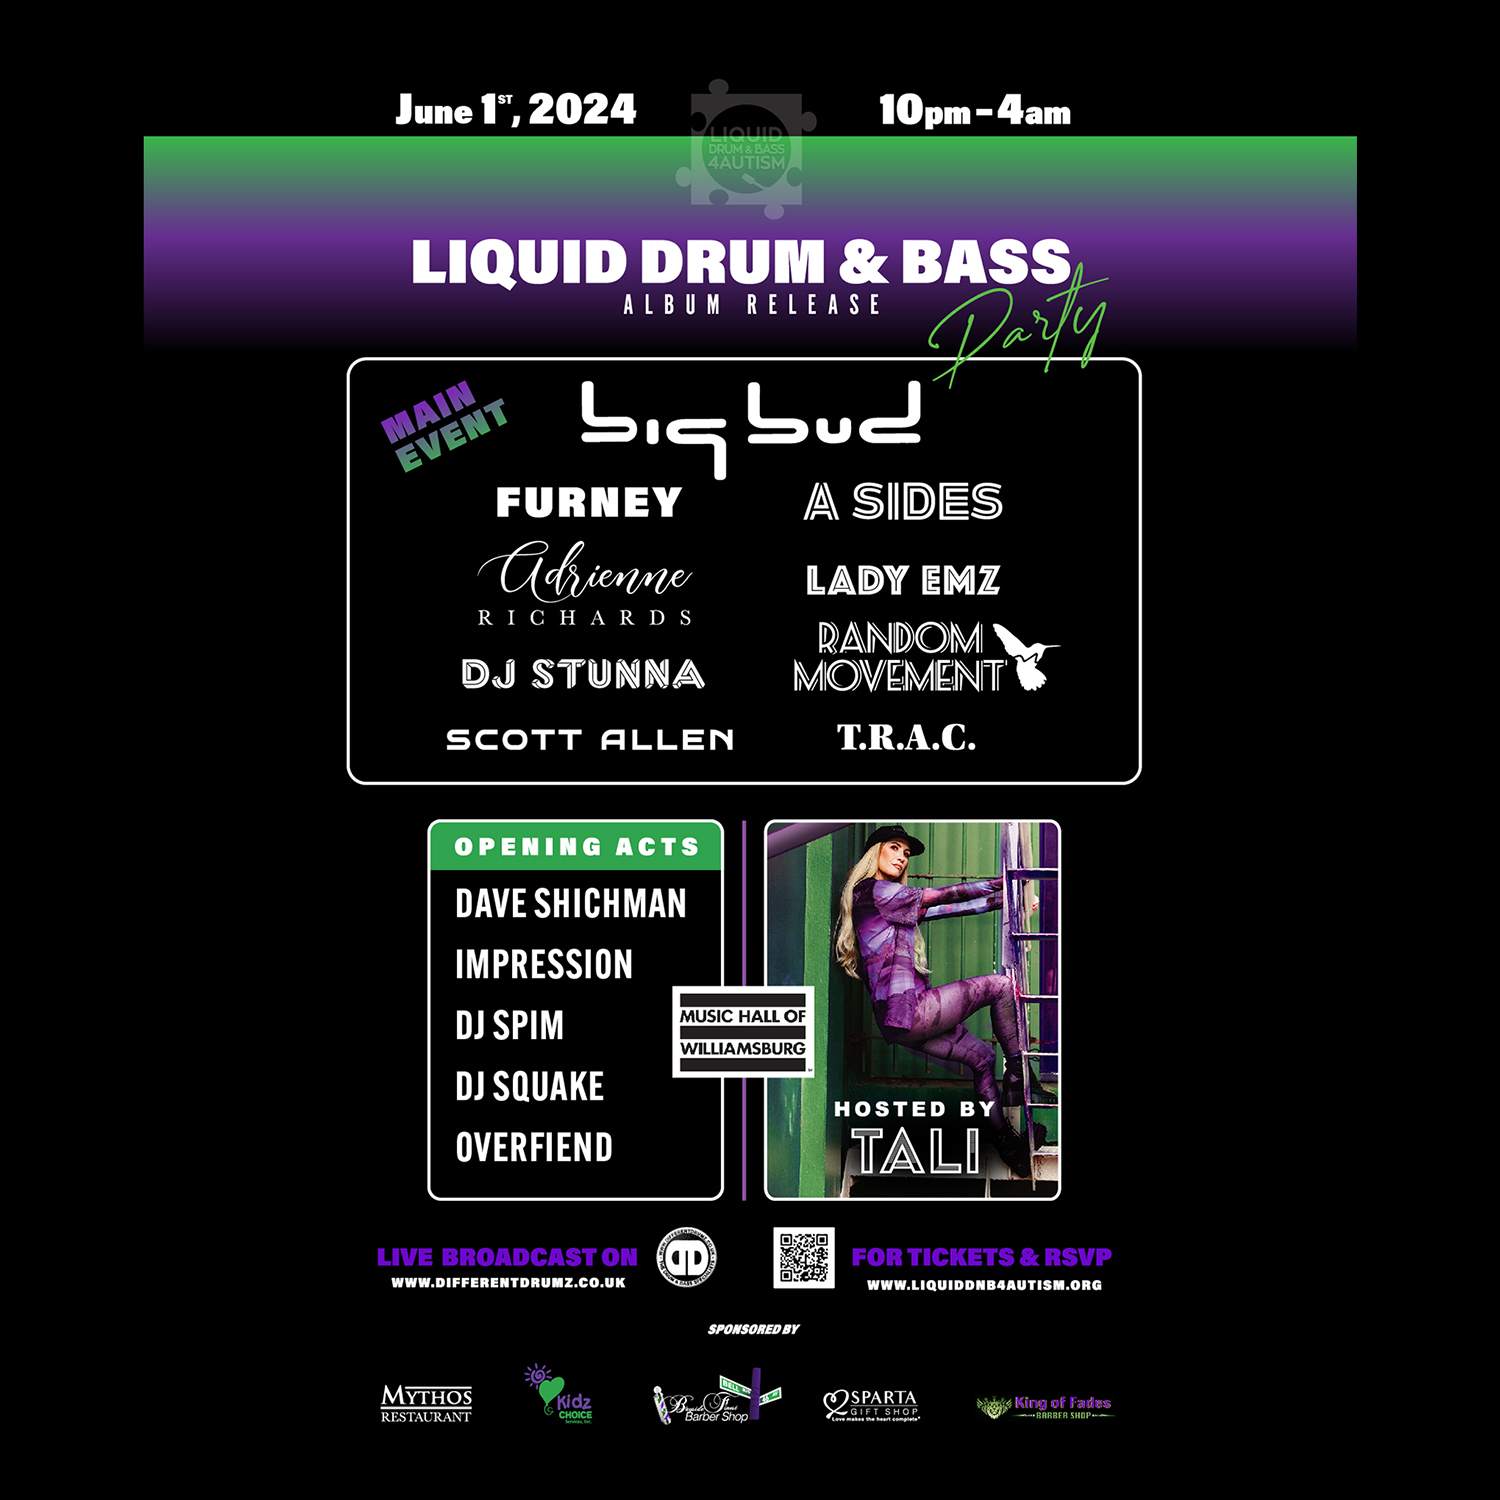 Liquid Drum & Bass Album Release Party Big Bud, A Sides, Dave Shichman + more - Página frontal